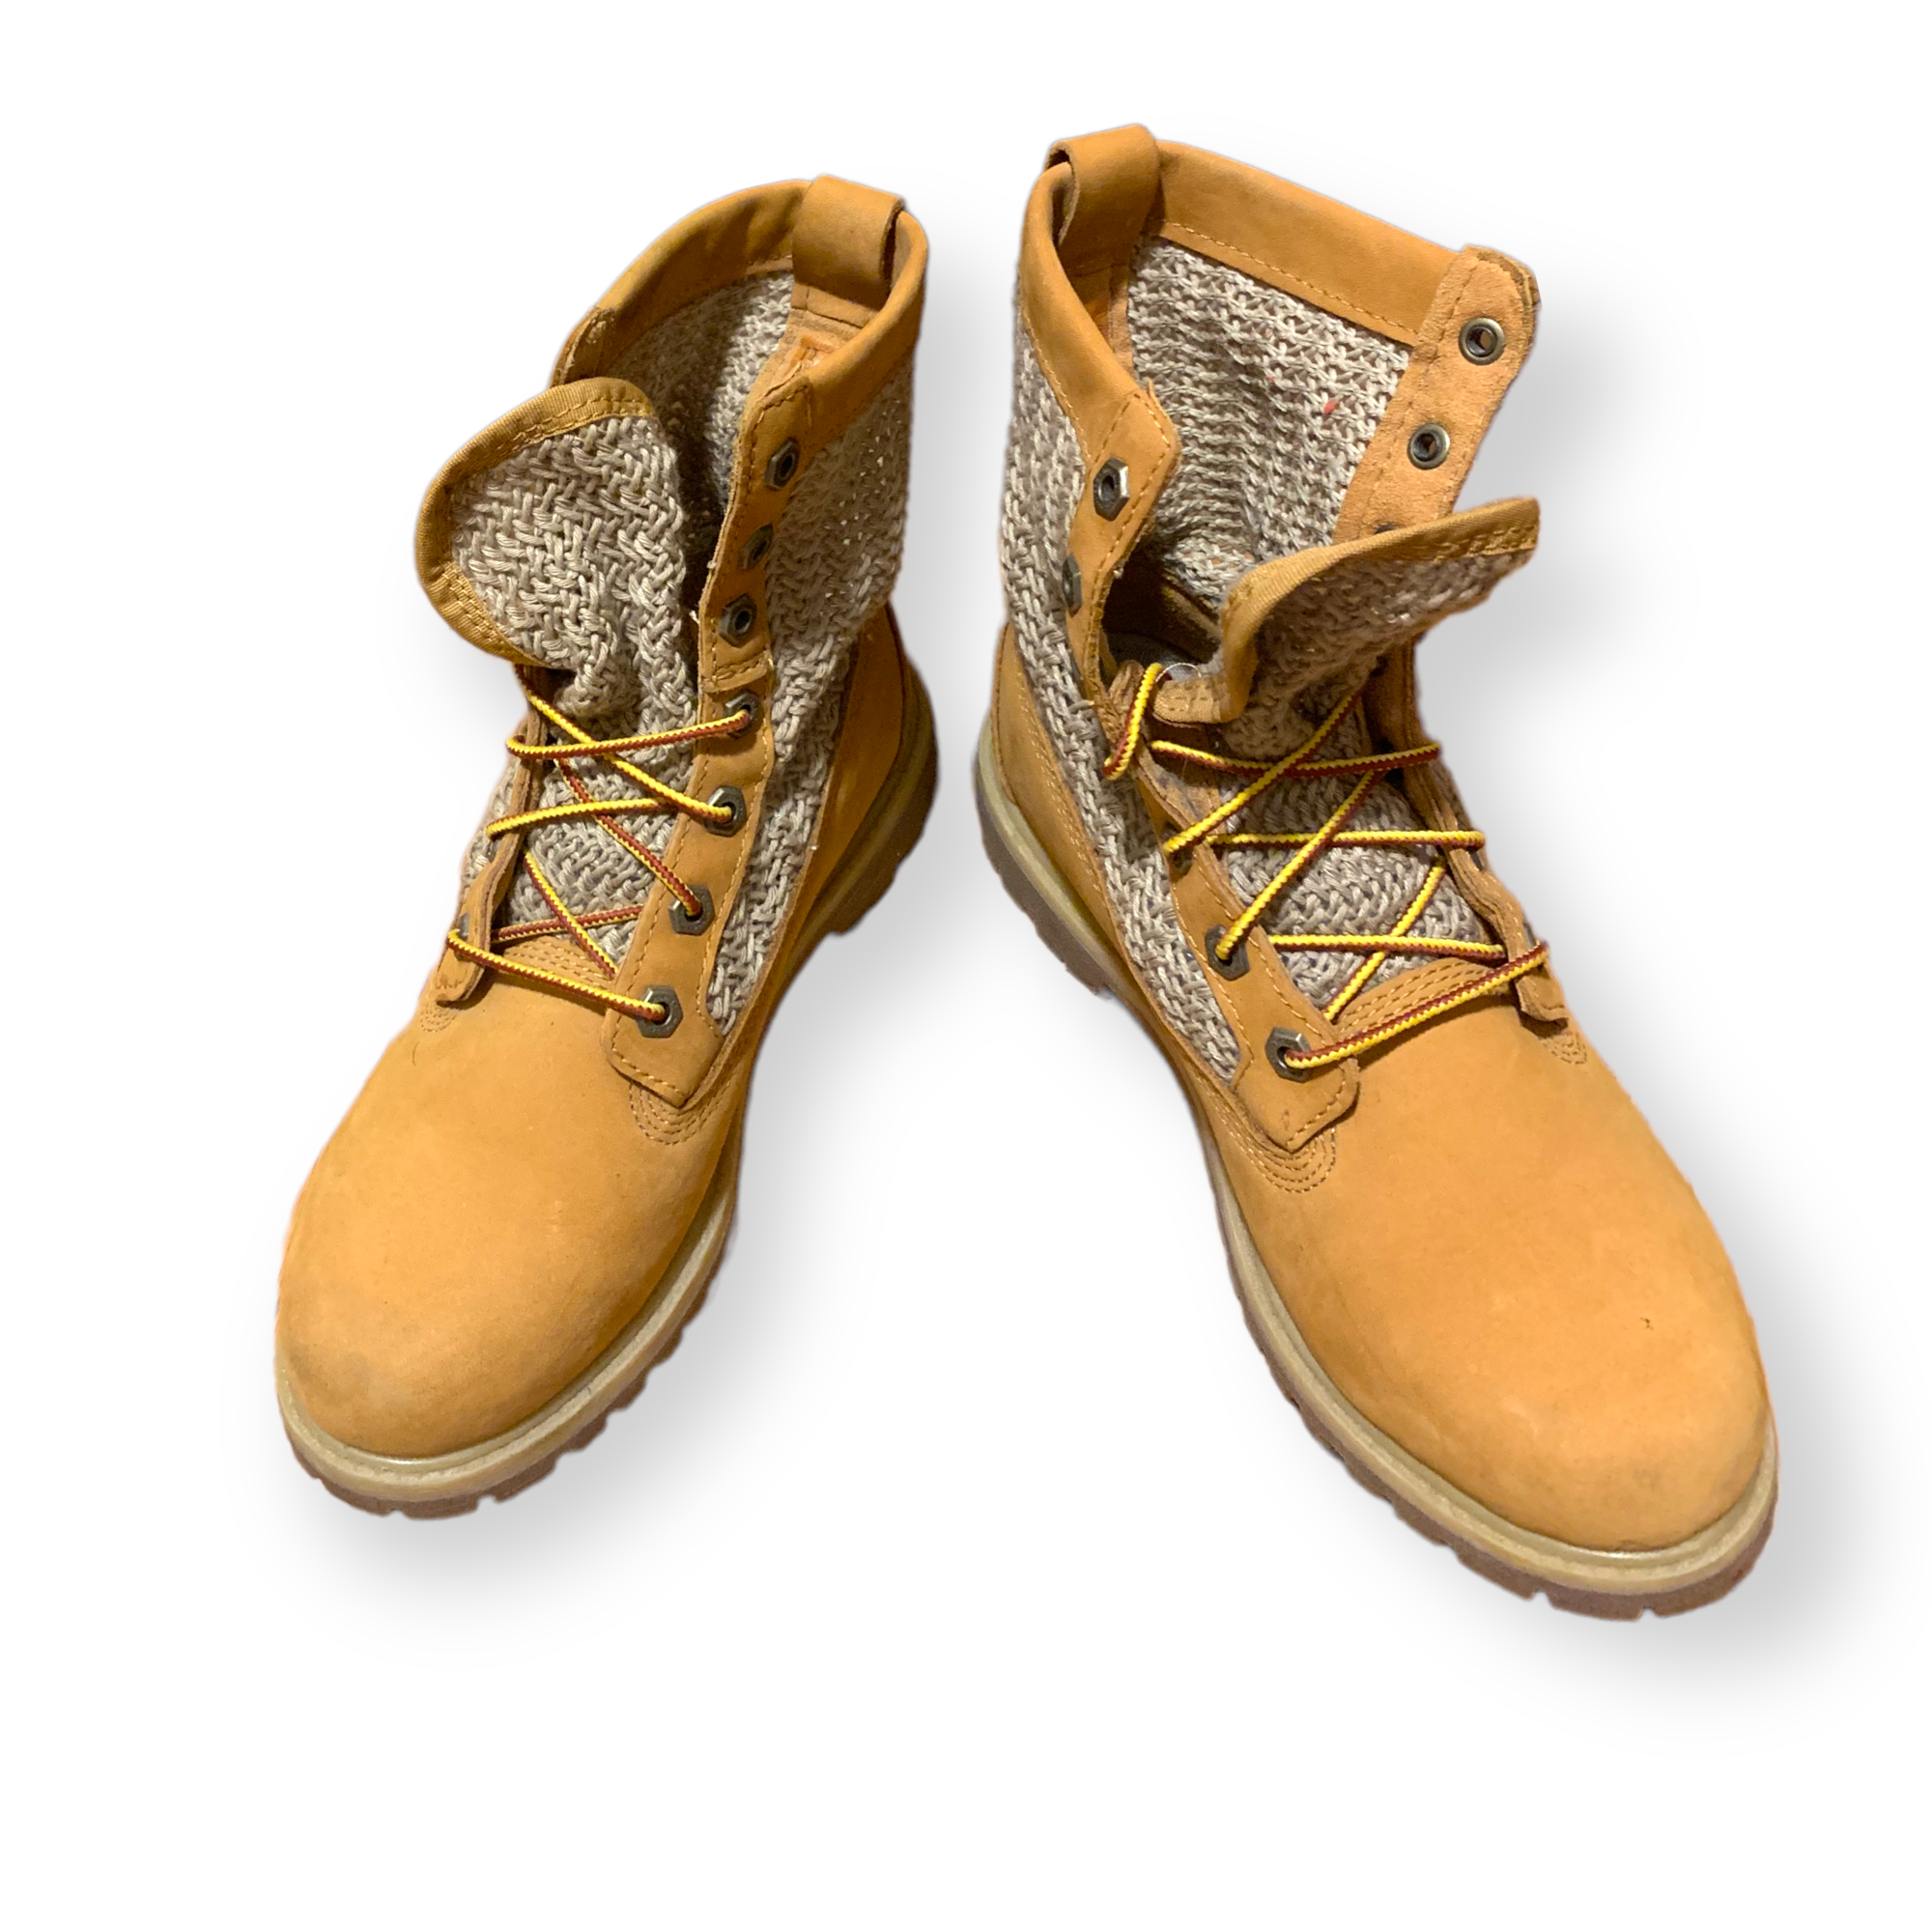 TIMBERLAND boots with Burlap Woven Accents